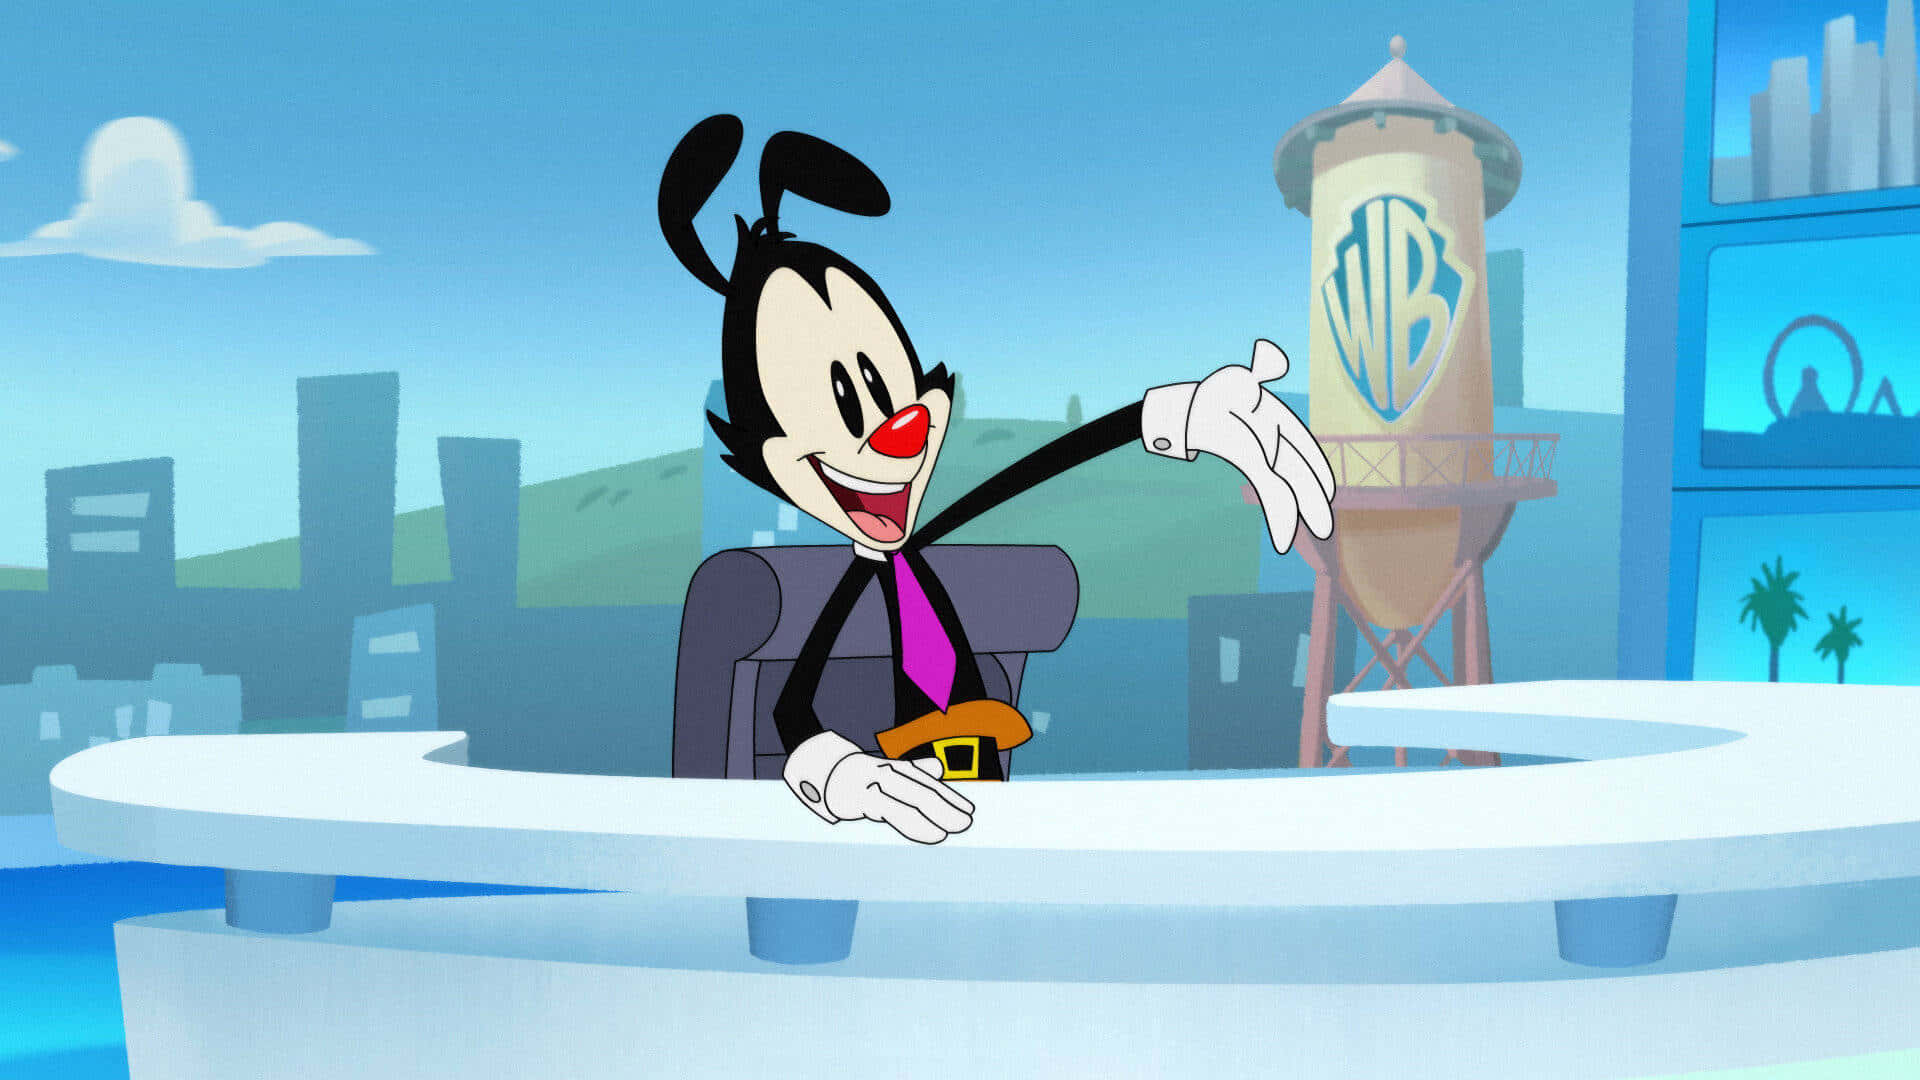 Animaniacs bringing laughter and joy to all